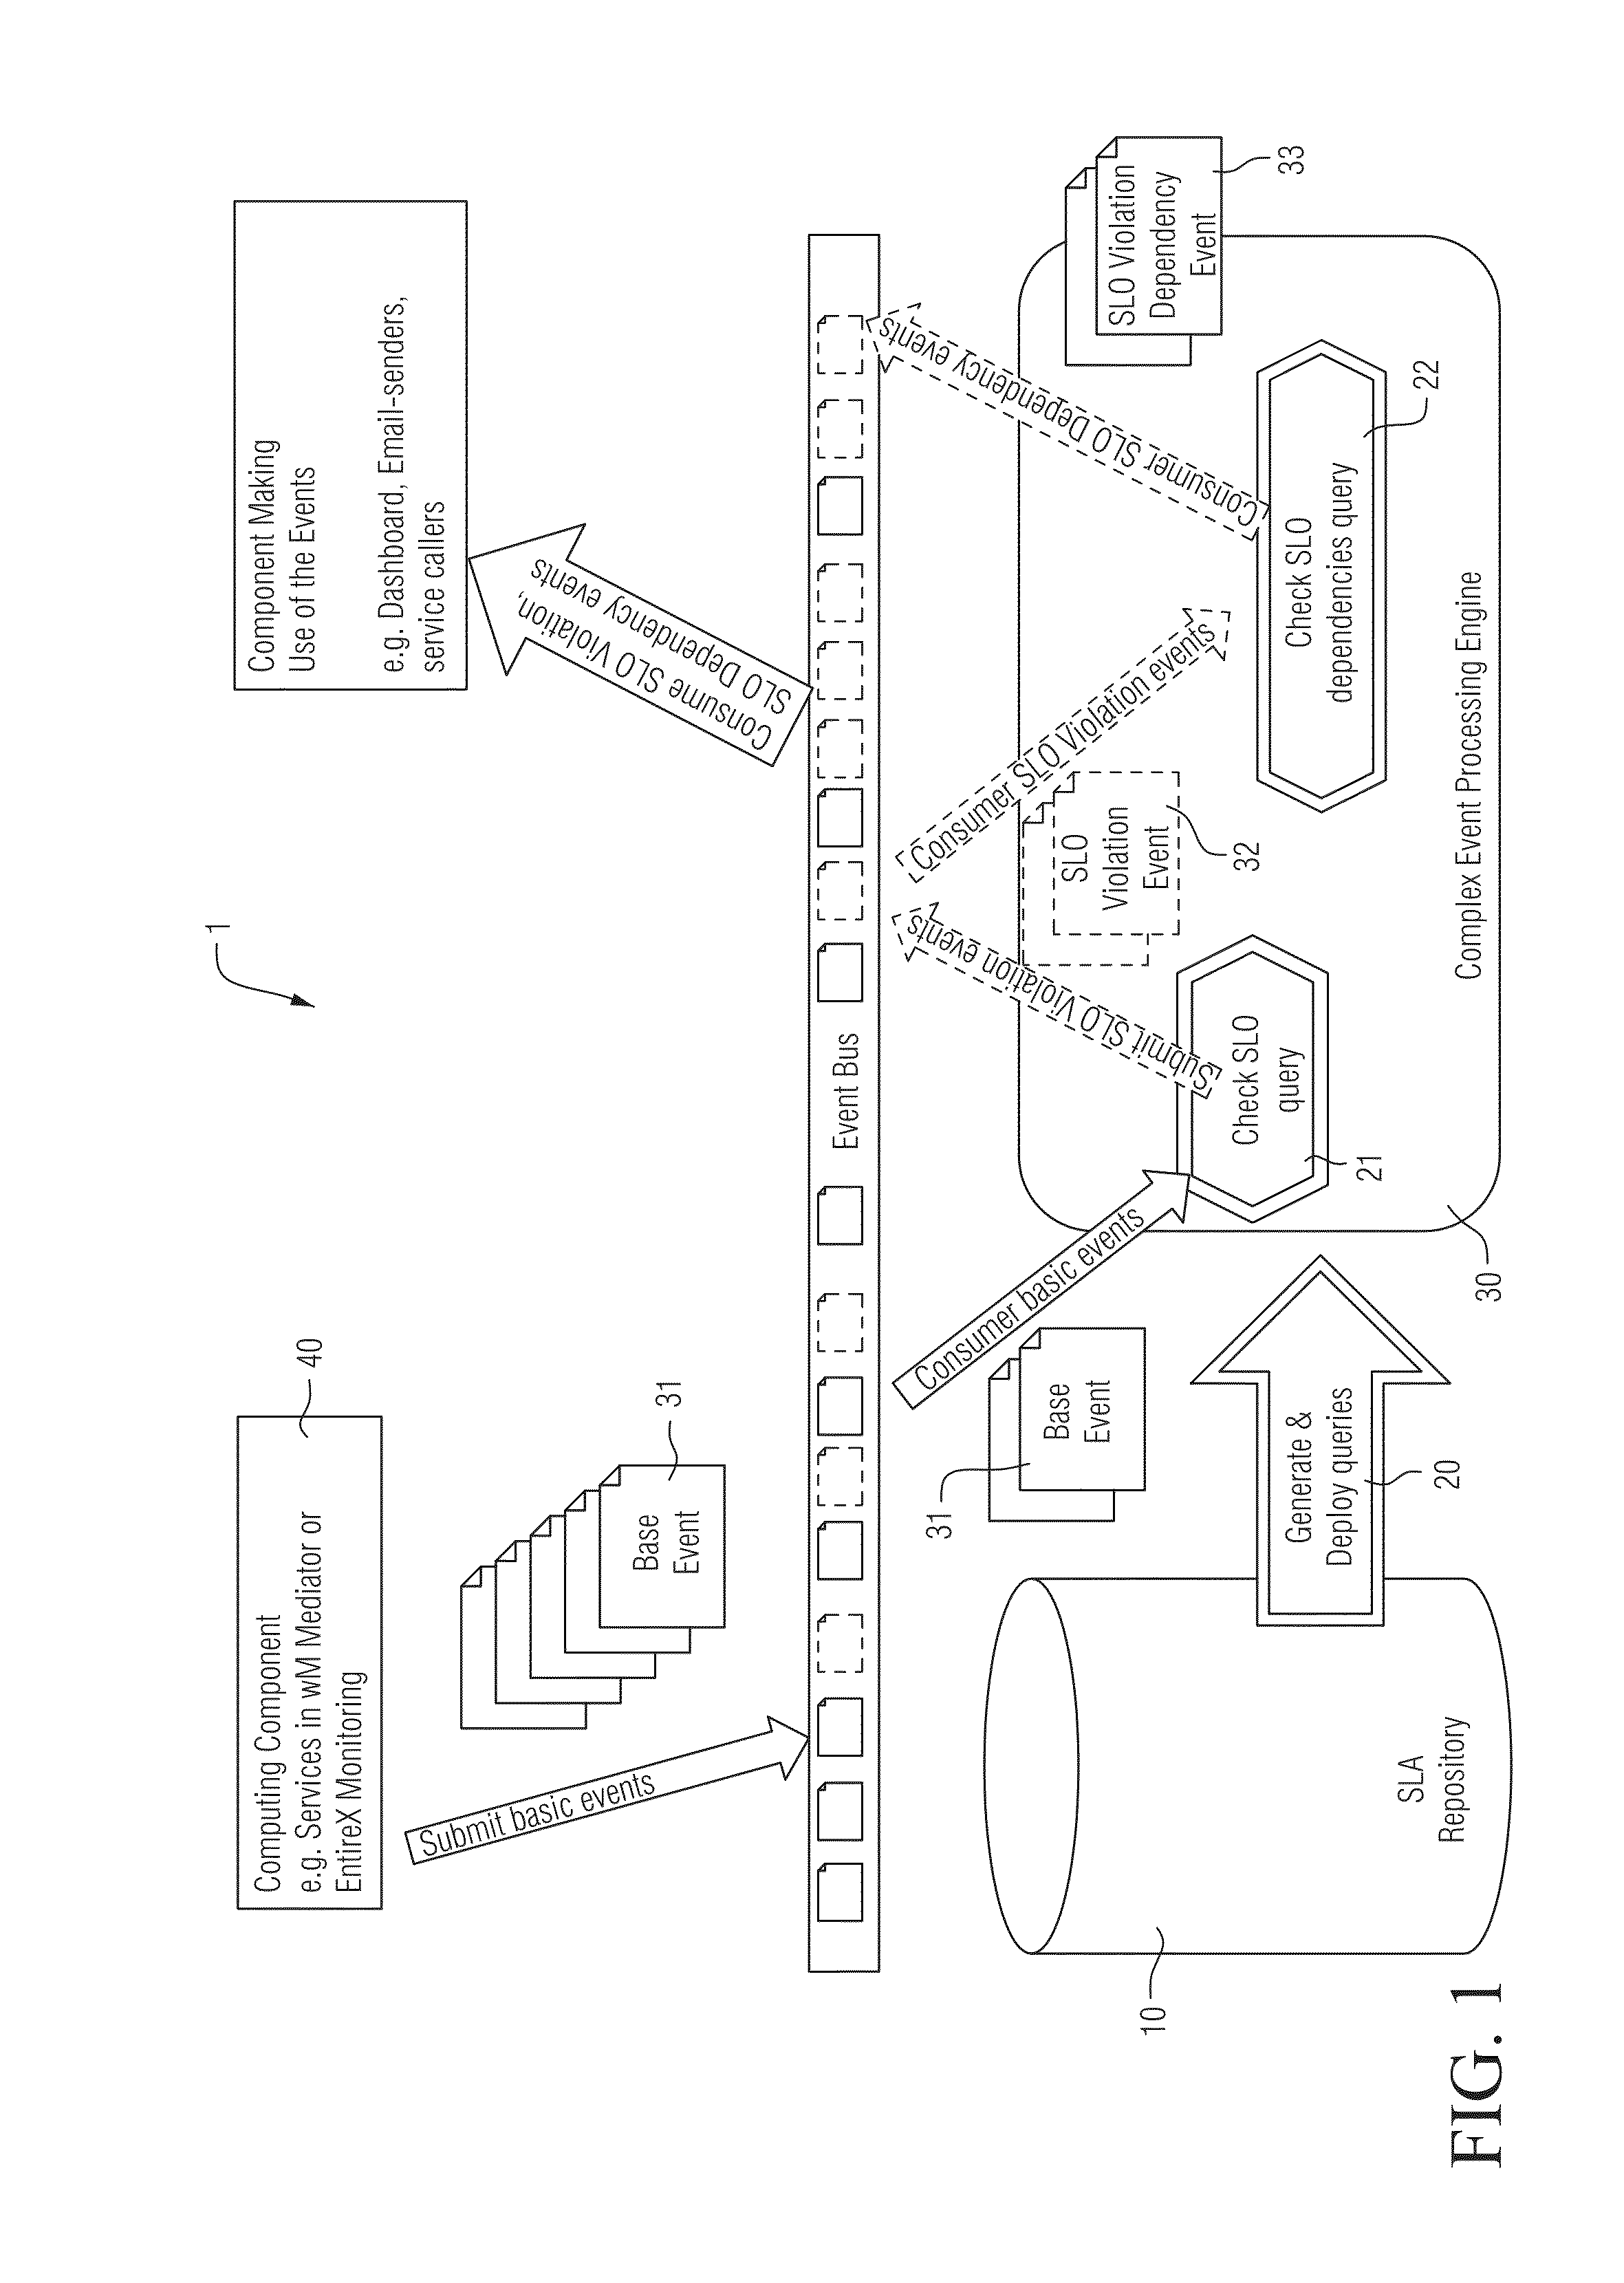 Monitoring system and method for monitoring the operation of distributed computing components